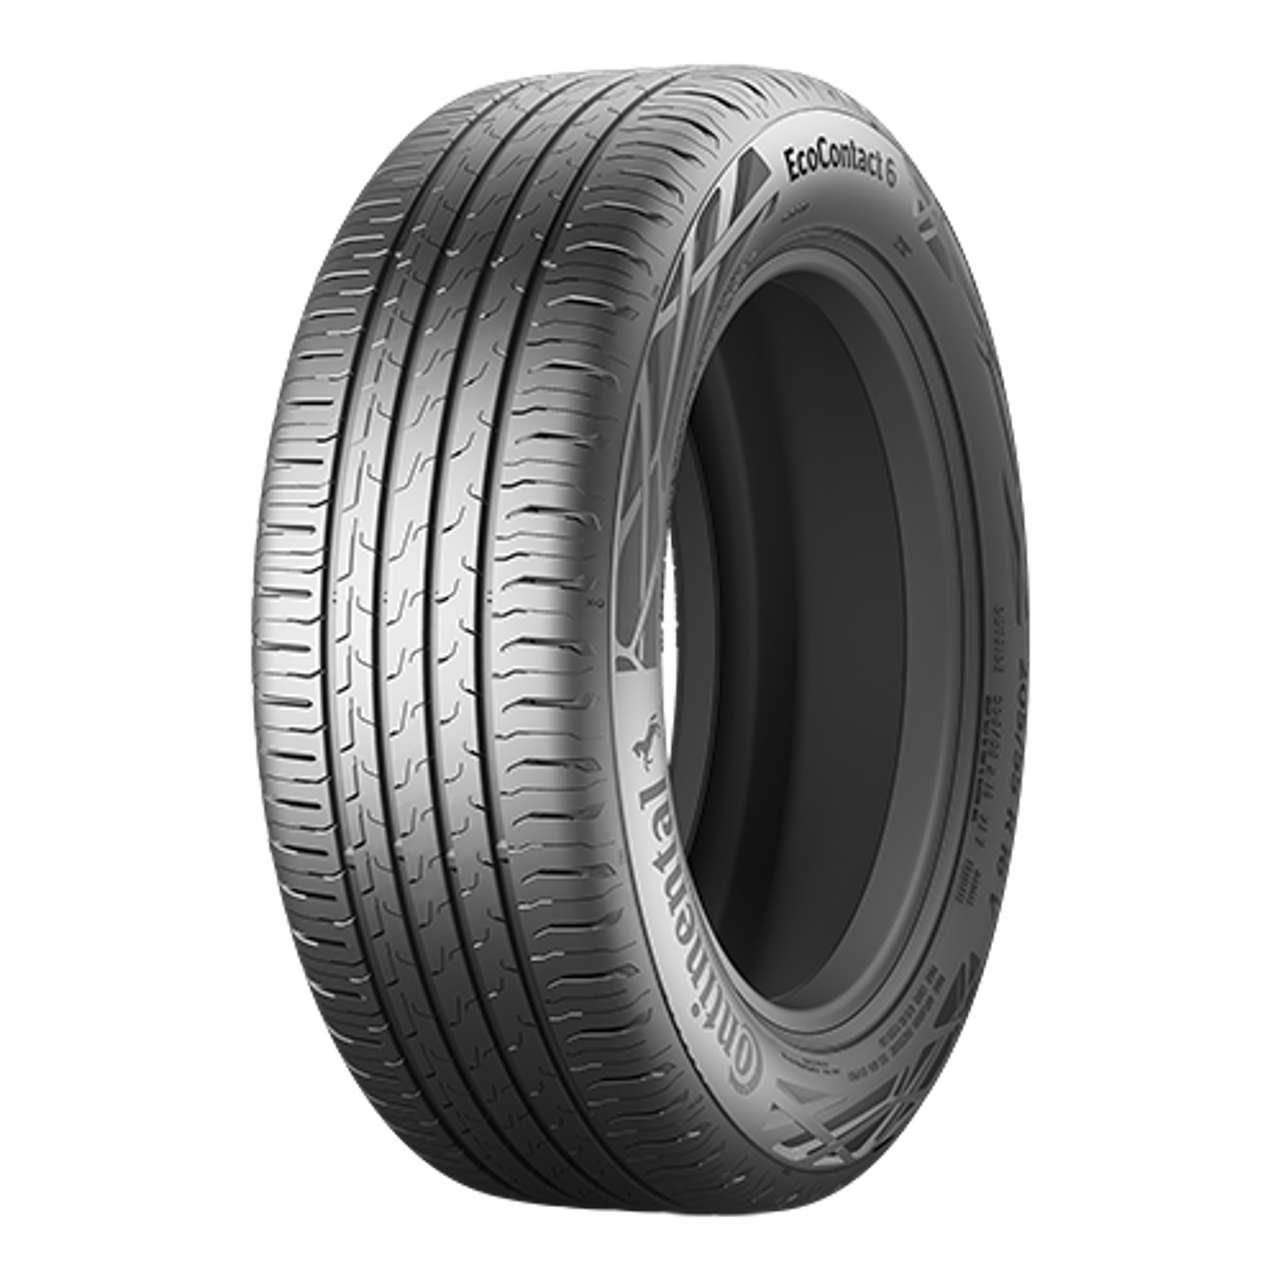 CONTINENTAL ECOCONTACT 6 (EVc) 195/60R15 88H von Continental